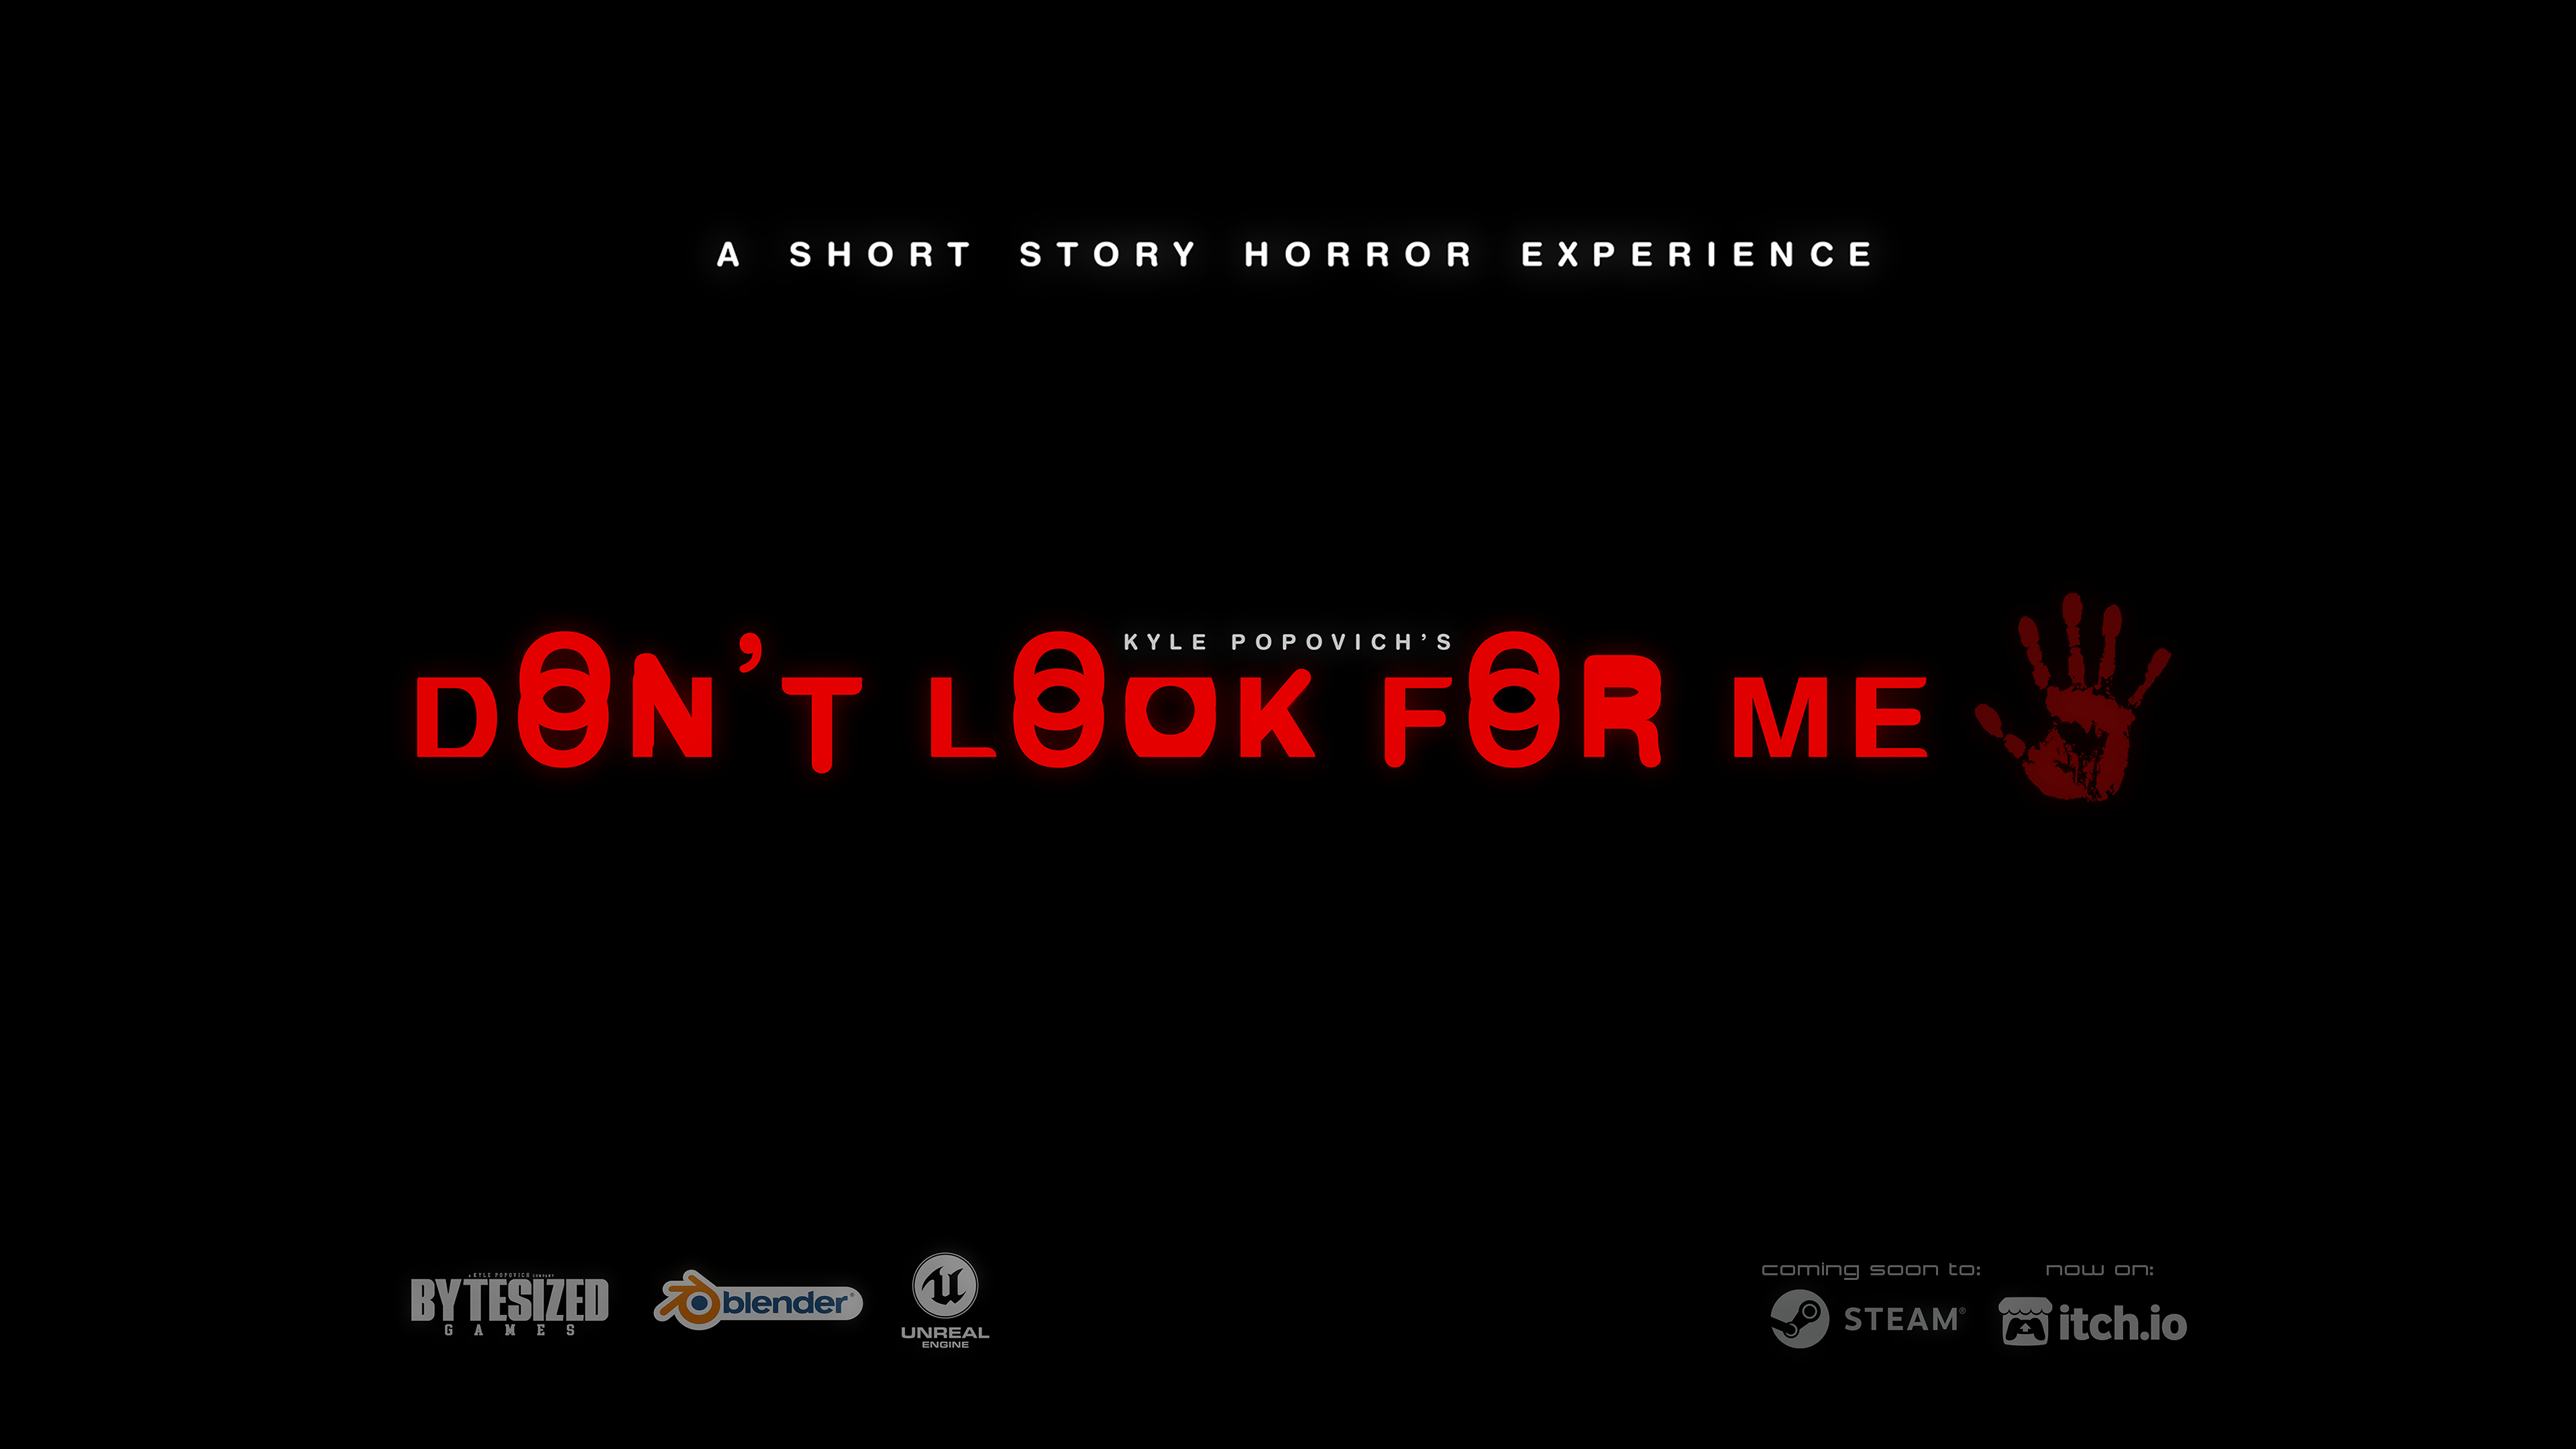 DONT' LOOK FOR ME